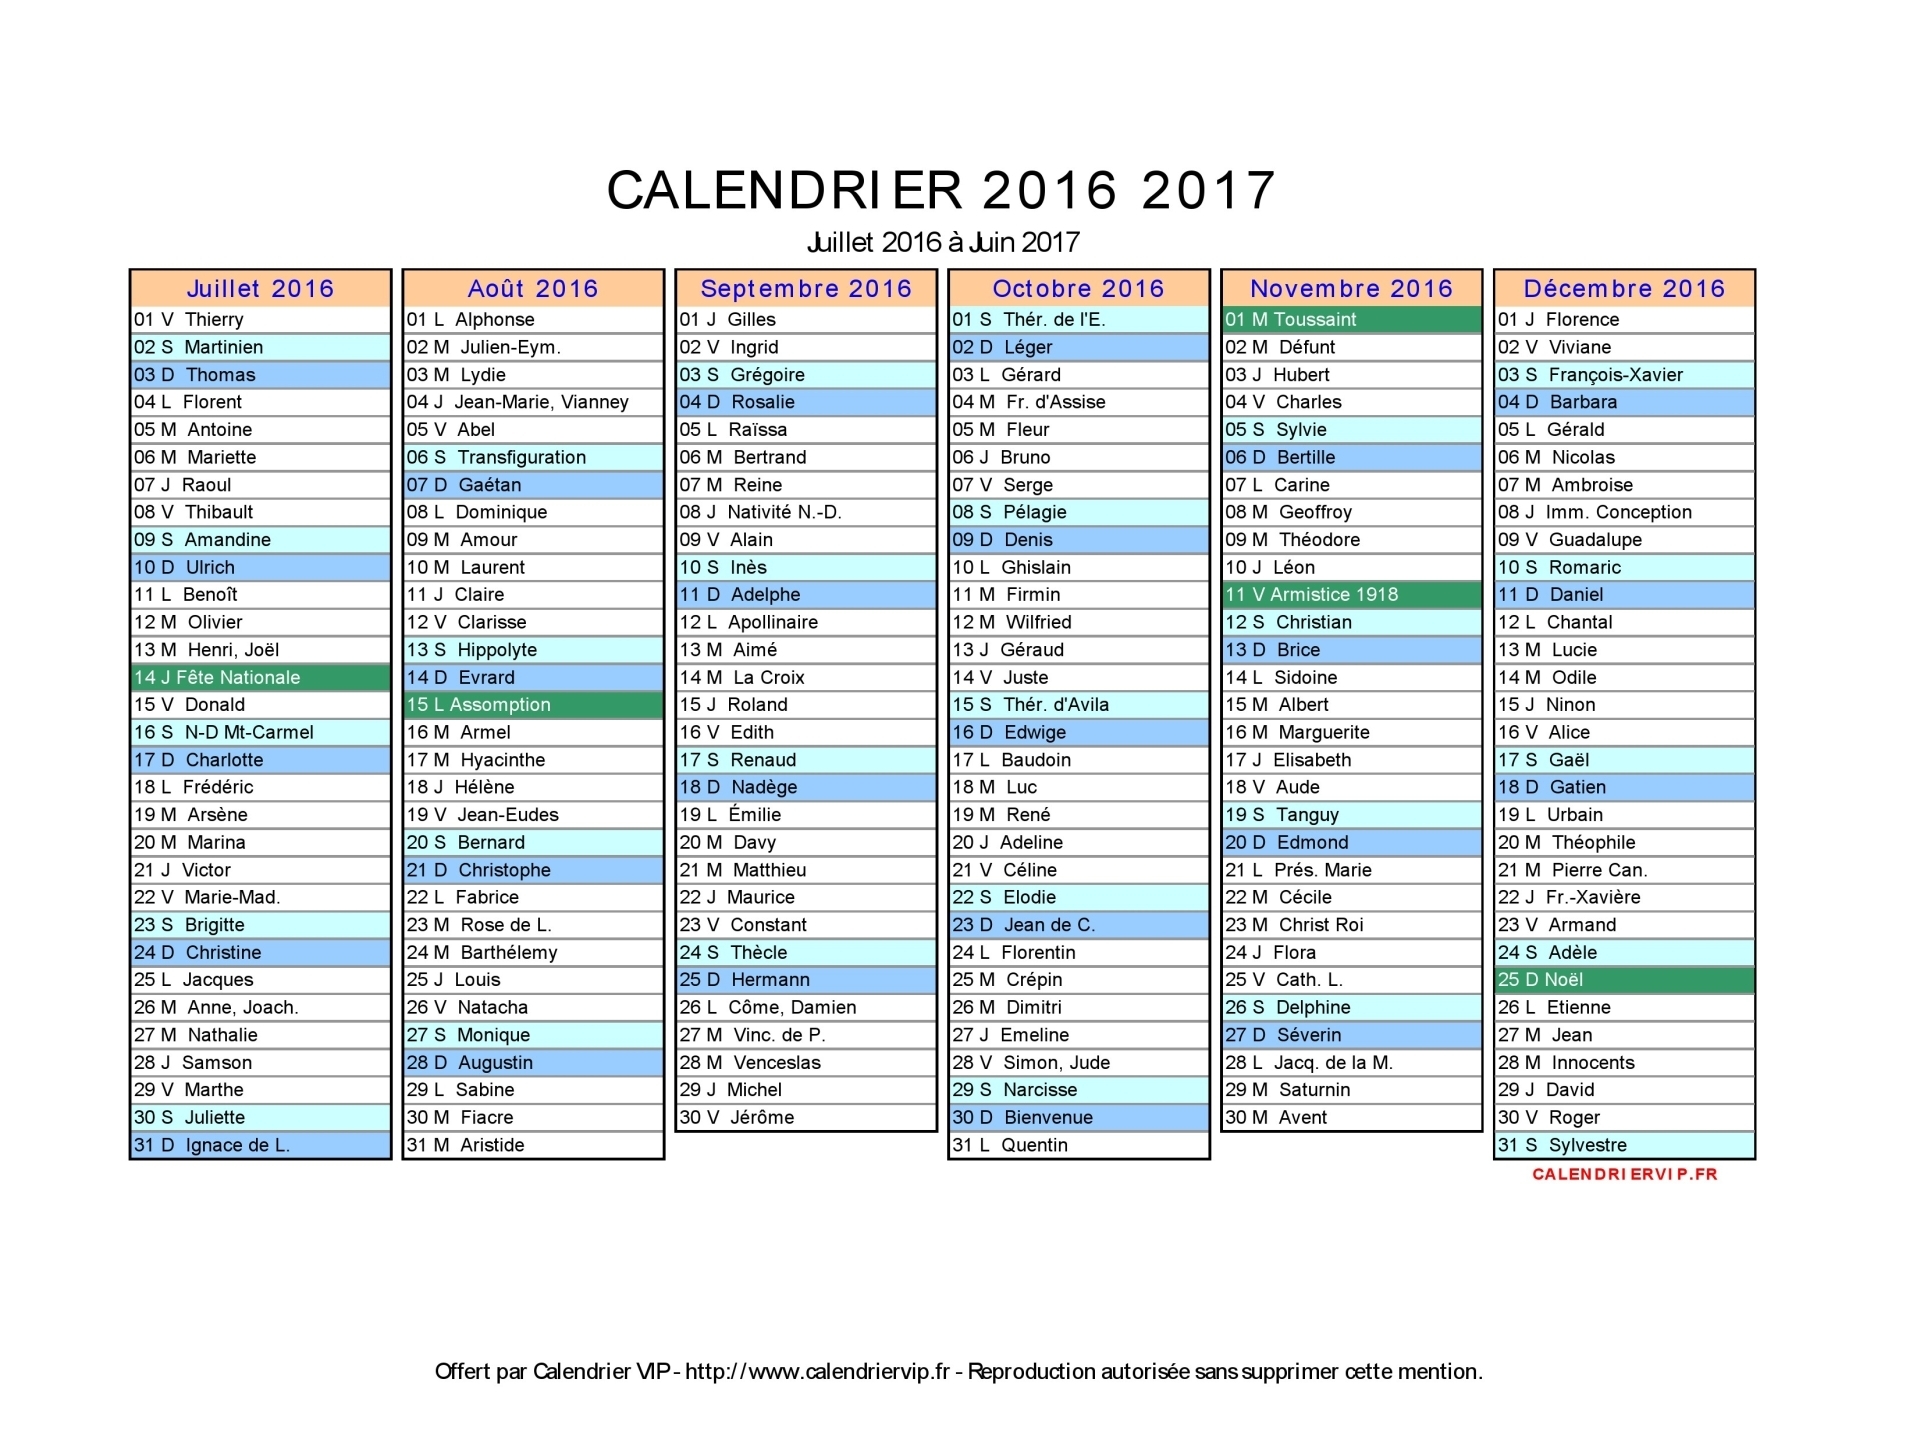 Calendrier vierge excel